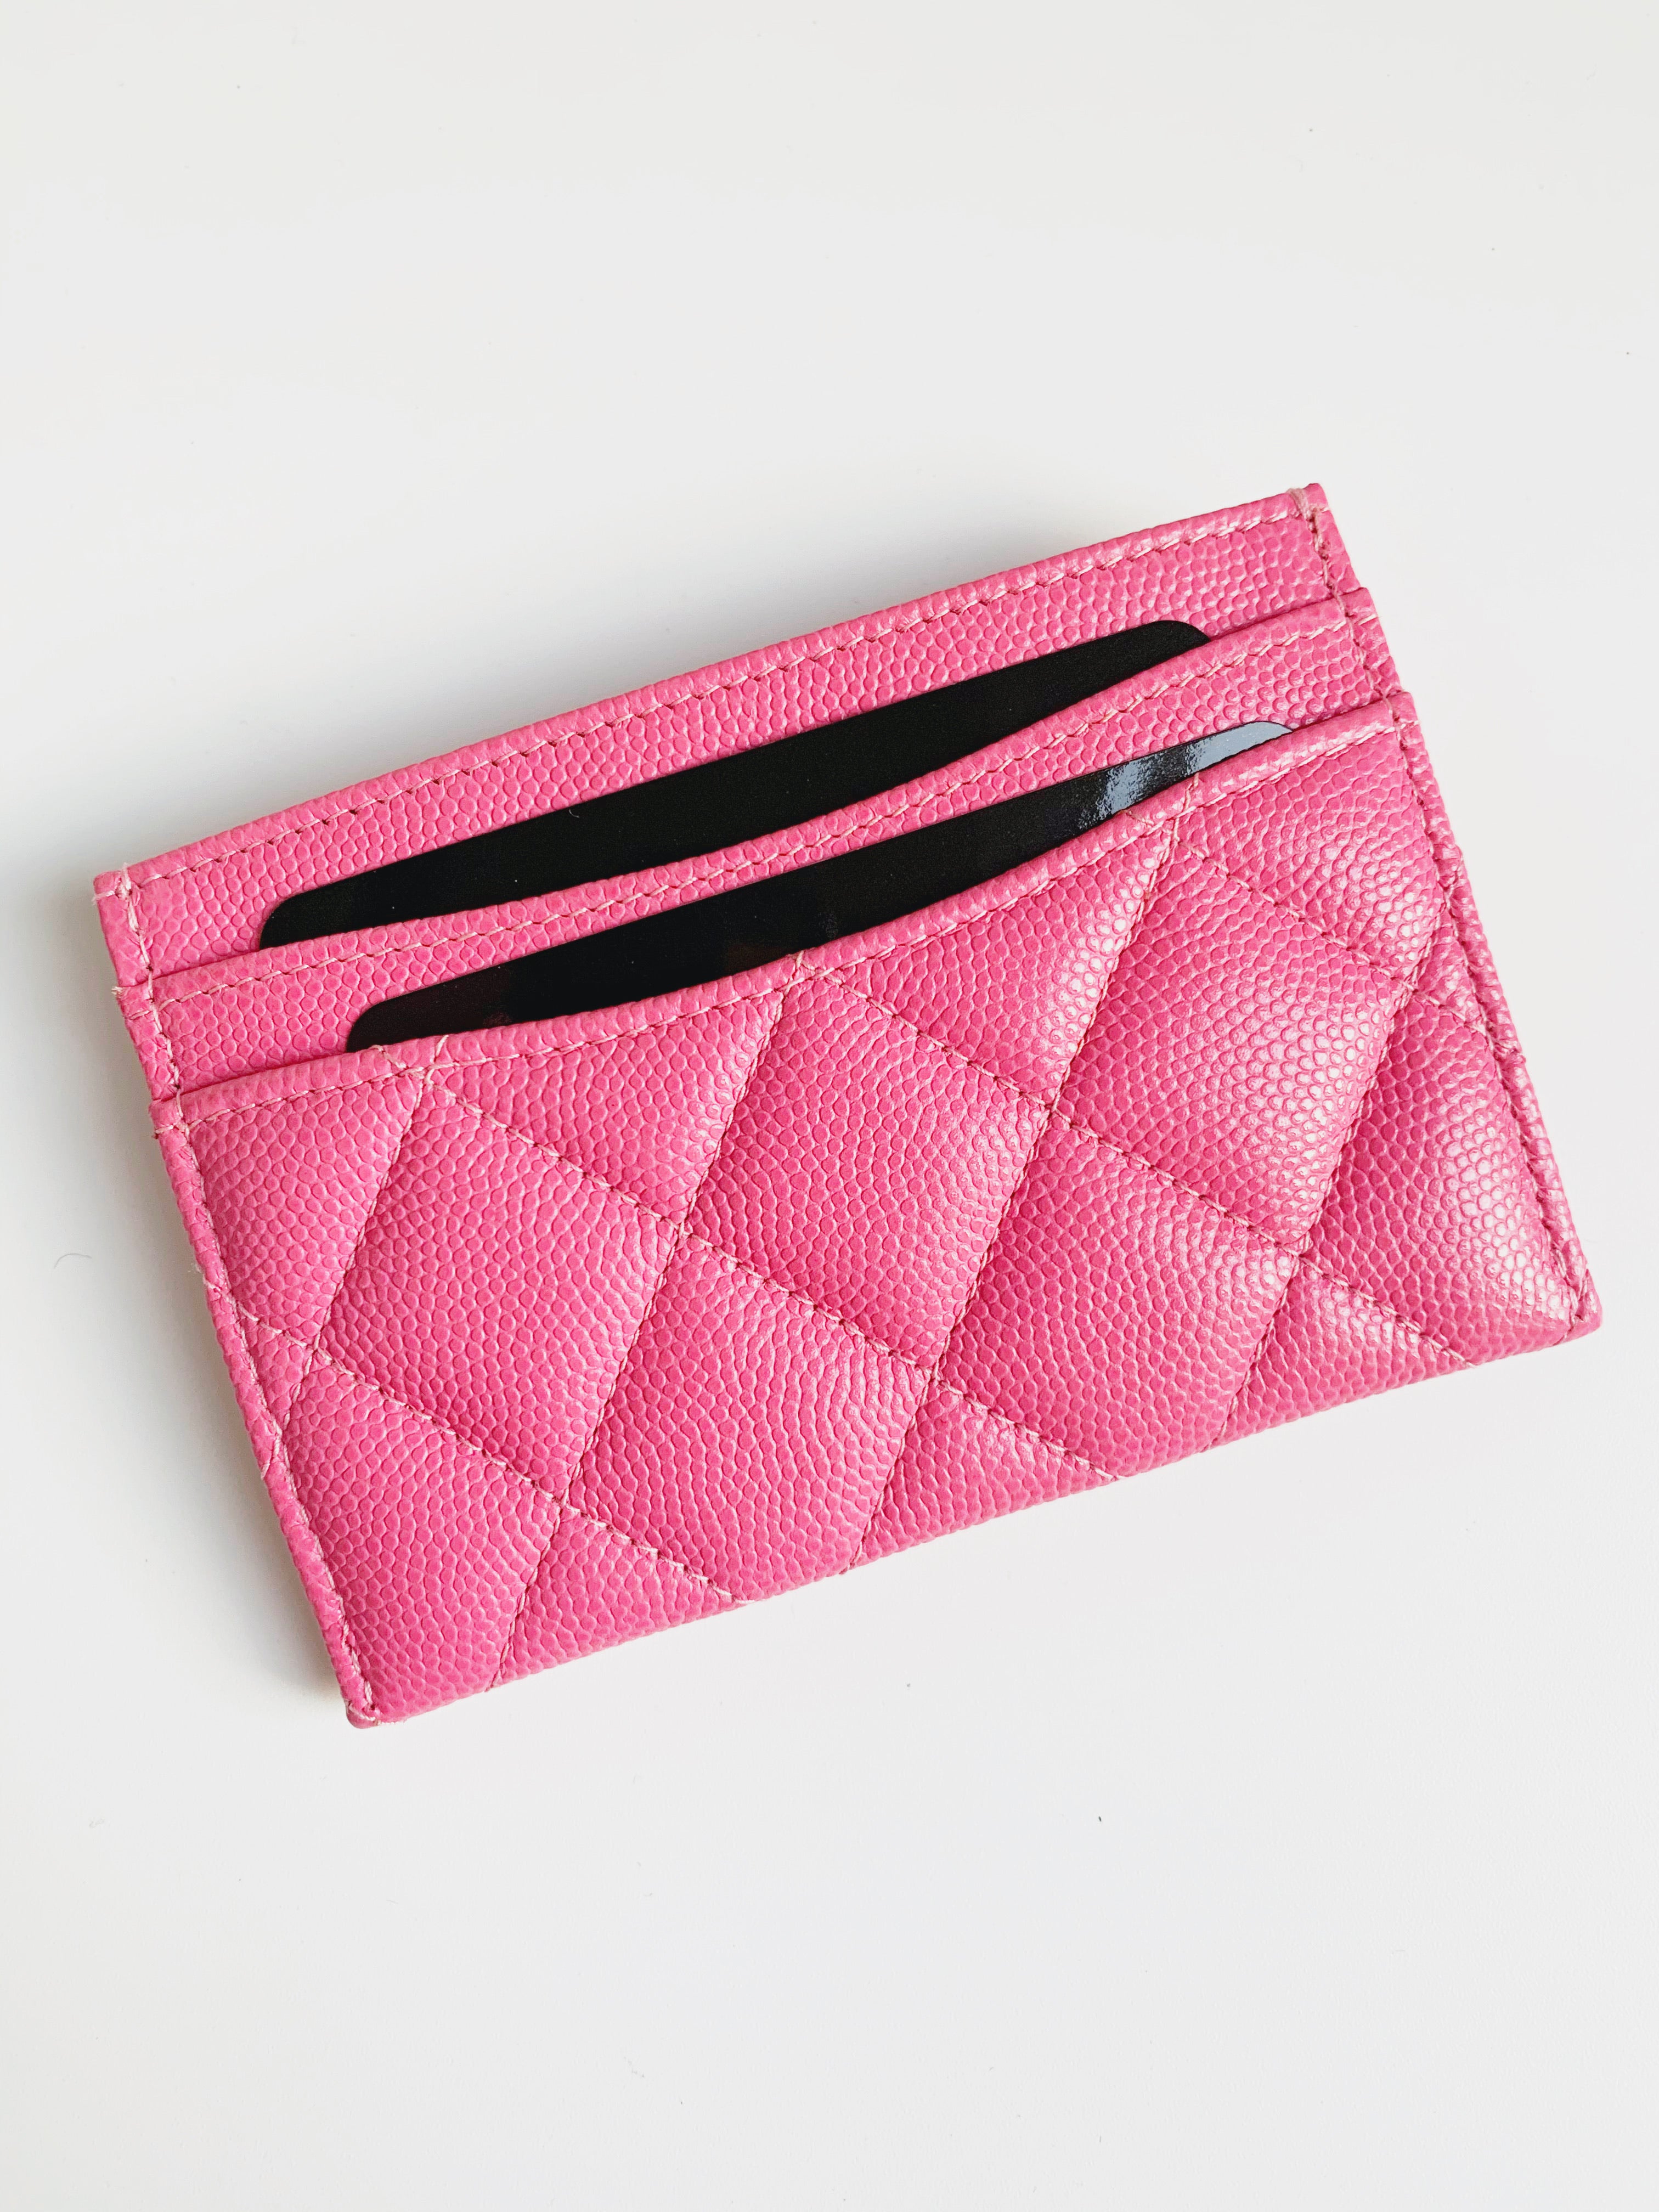 chanel classic card holder pink